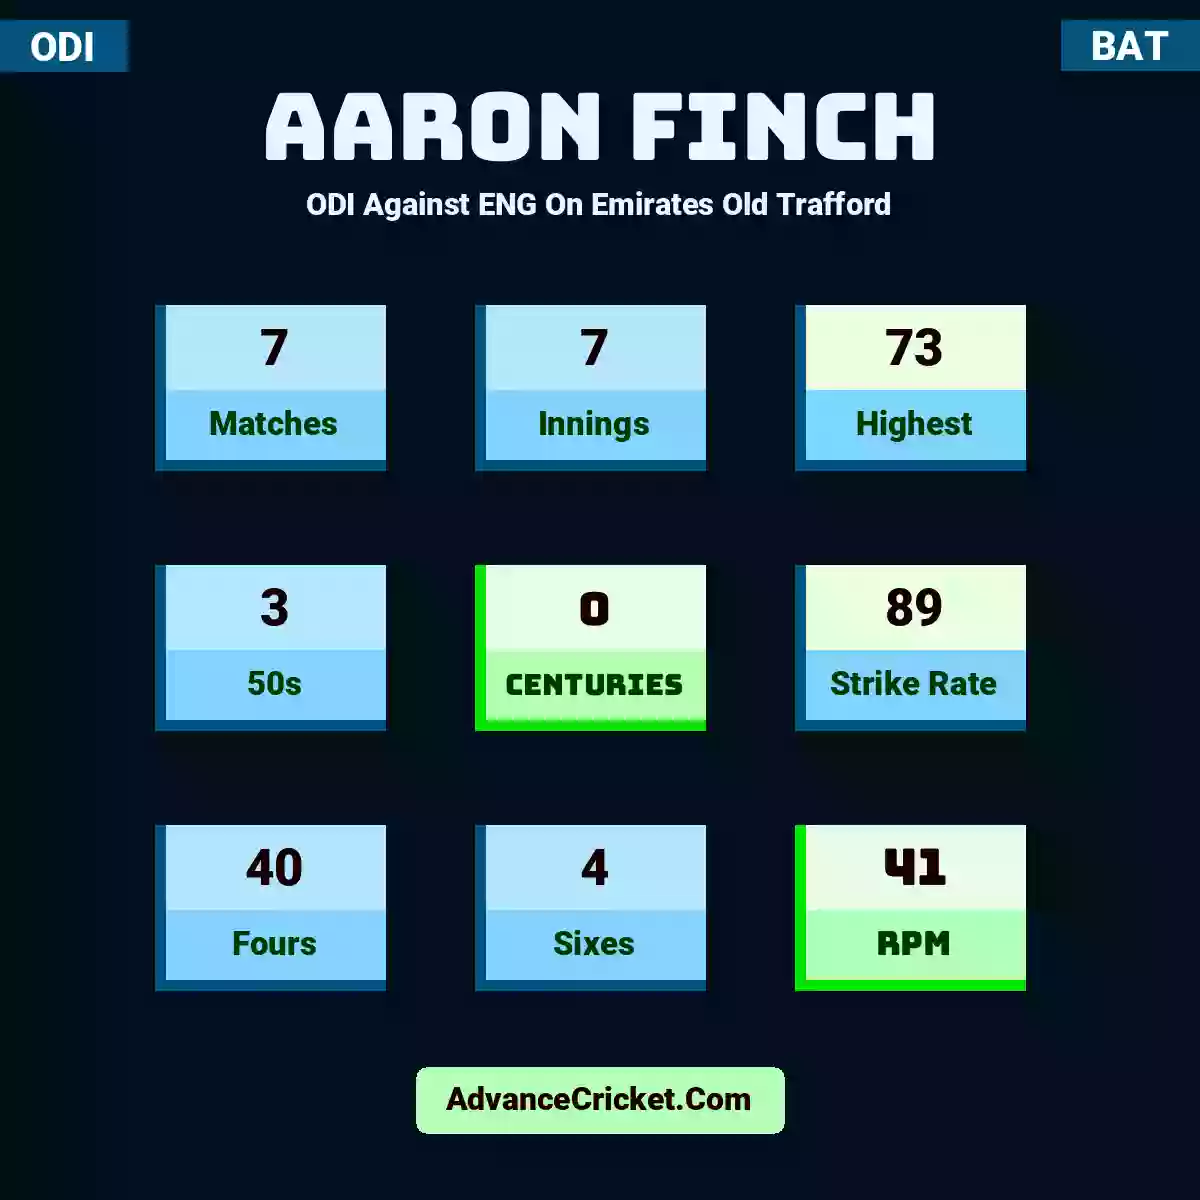 Aaron Finch ODI  Against ENG On Emirates Old Trafford, Aaron Finch played 7 matches, scored 73 runs as highest, 3 half-centuries, and 0 centuries, with a strike rate of 89. A.Finch hit 40 fours and 4 sixes, with an RPM of 41.